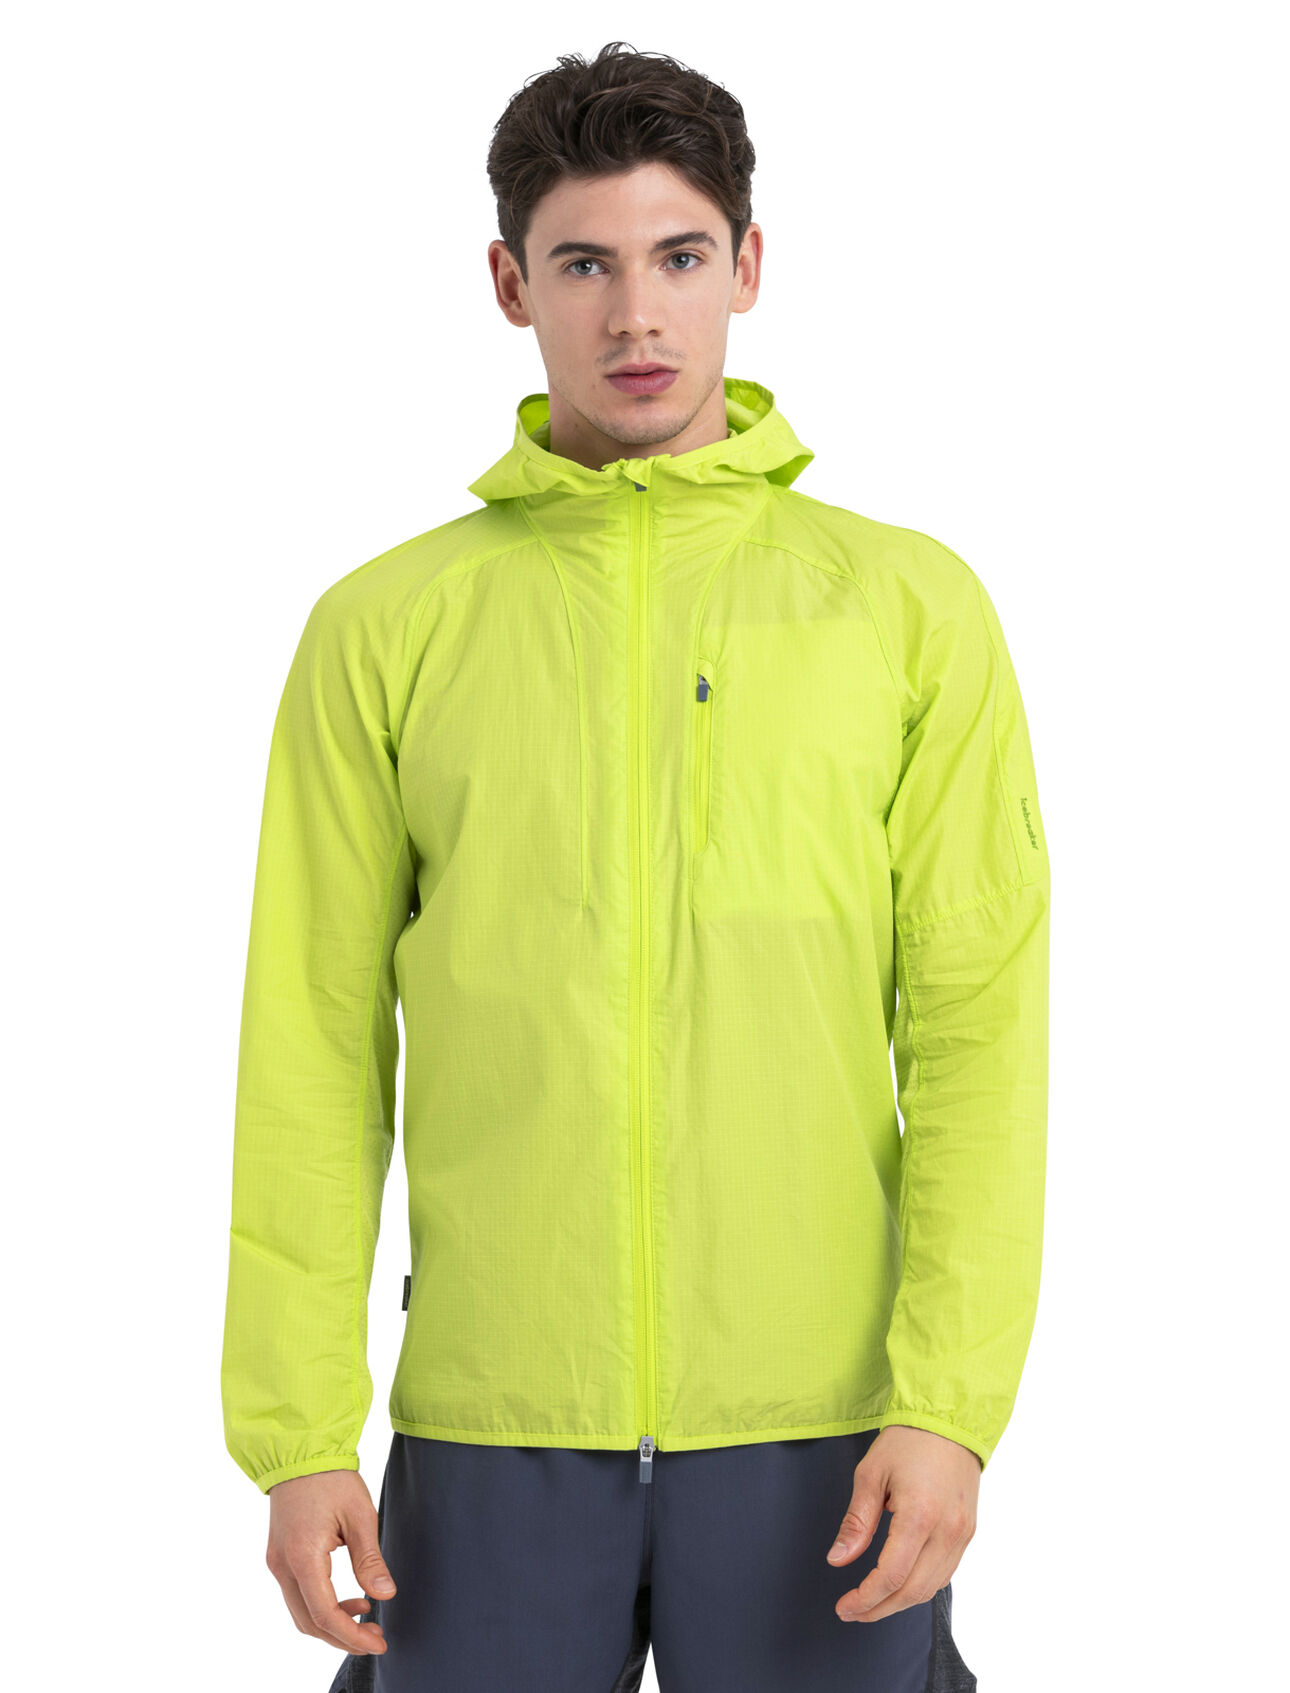 Mens Shell+™ Merino Blend Cotton Windbreaker A lightweight layer that shields against the wind and light rain during active mountain adventures, the Shell+™ Cotton Windbreaker puts a natural spin on technical outerwear.